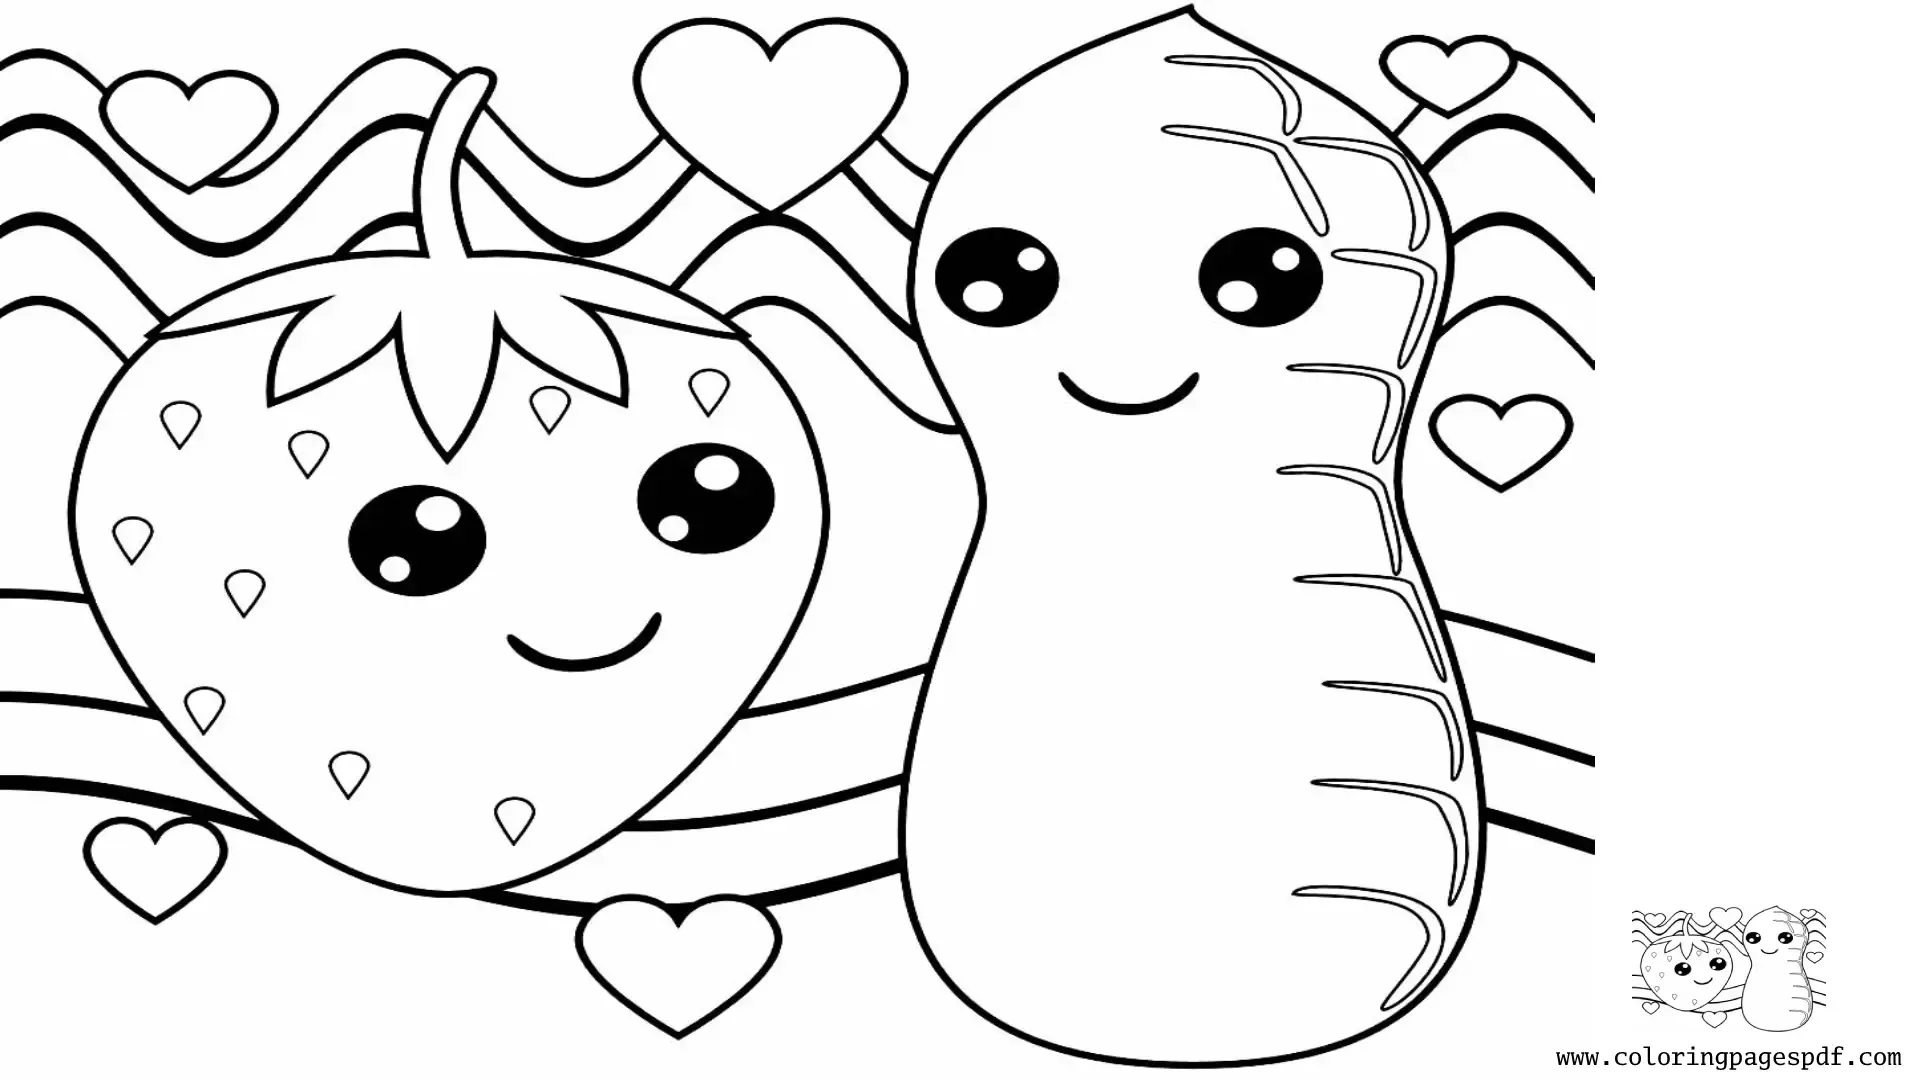 Coloring Page Of A Peanut And A Strawberry